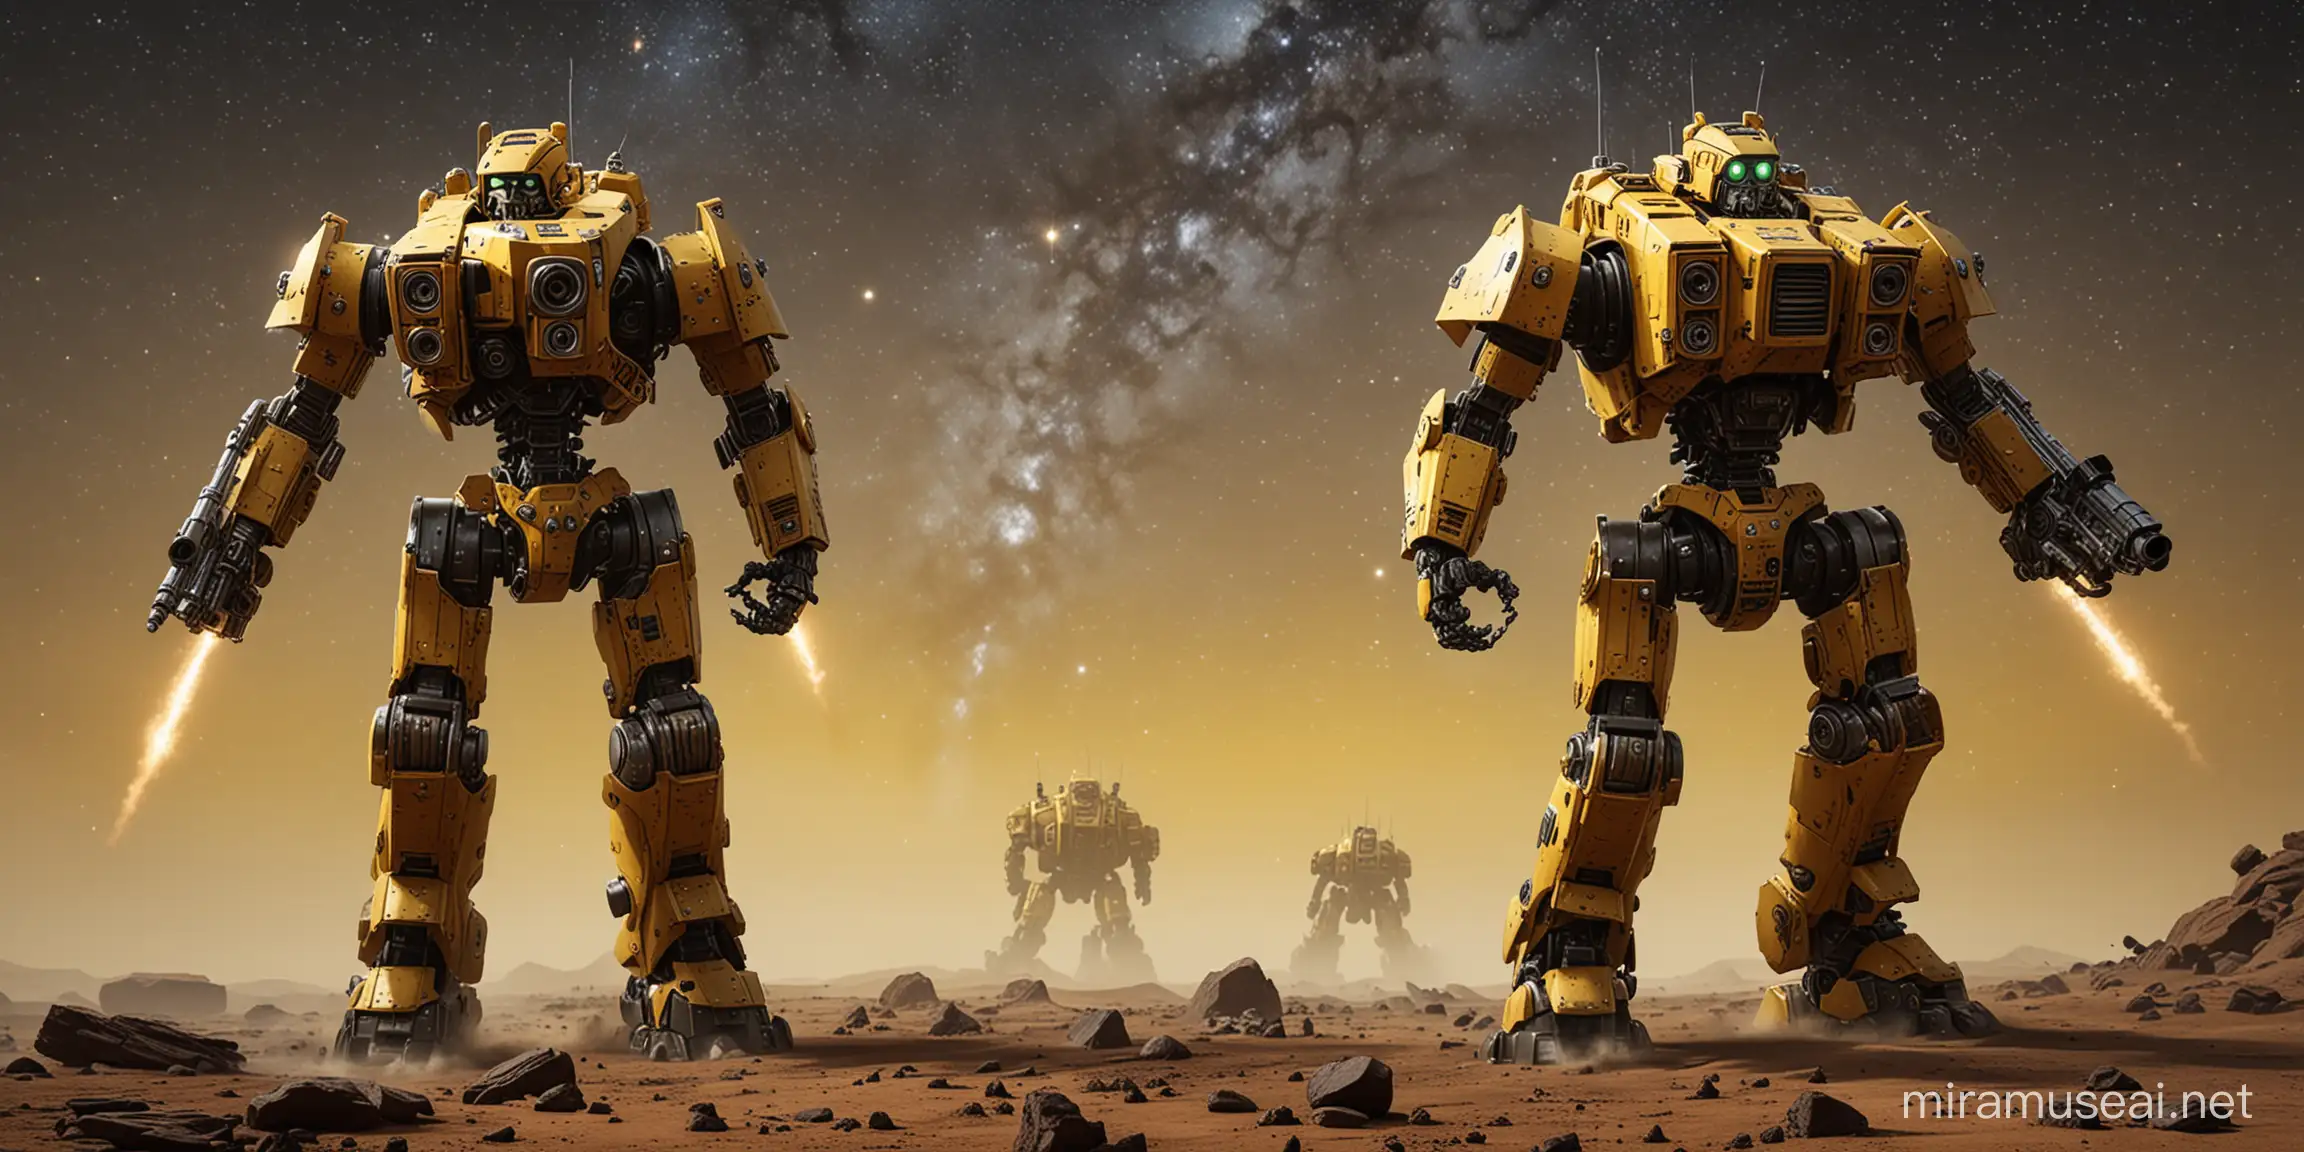 two bipedal robots with super heavy armour slow walk and firing to horizon, warhammer 40k style, yellow-black metallic chrome space background full of stars